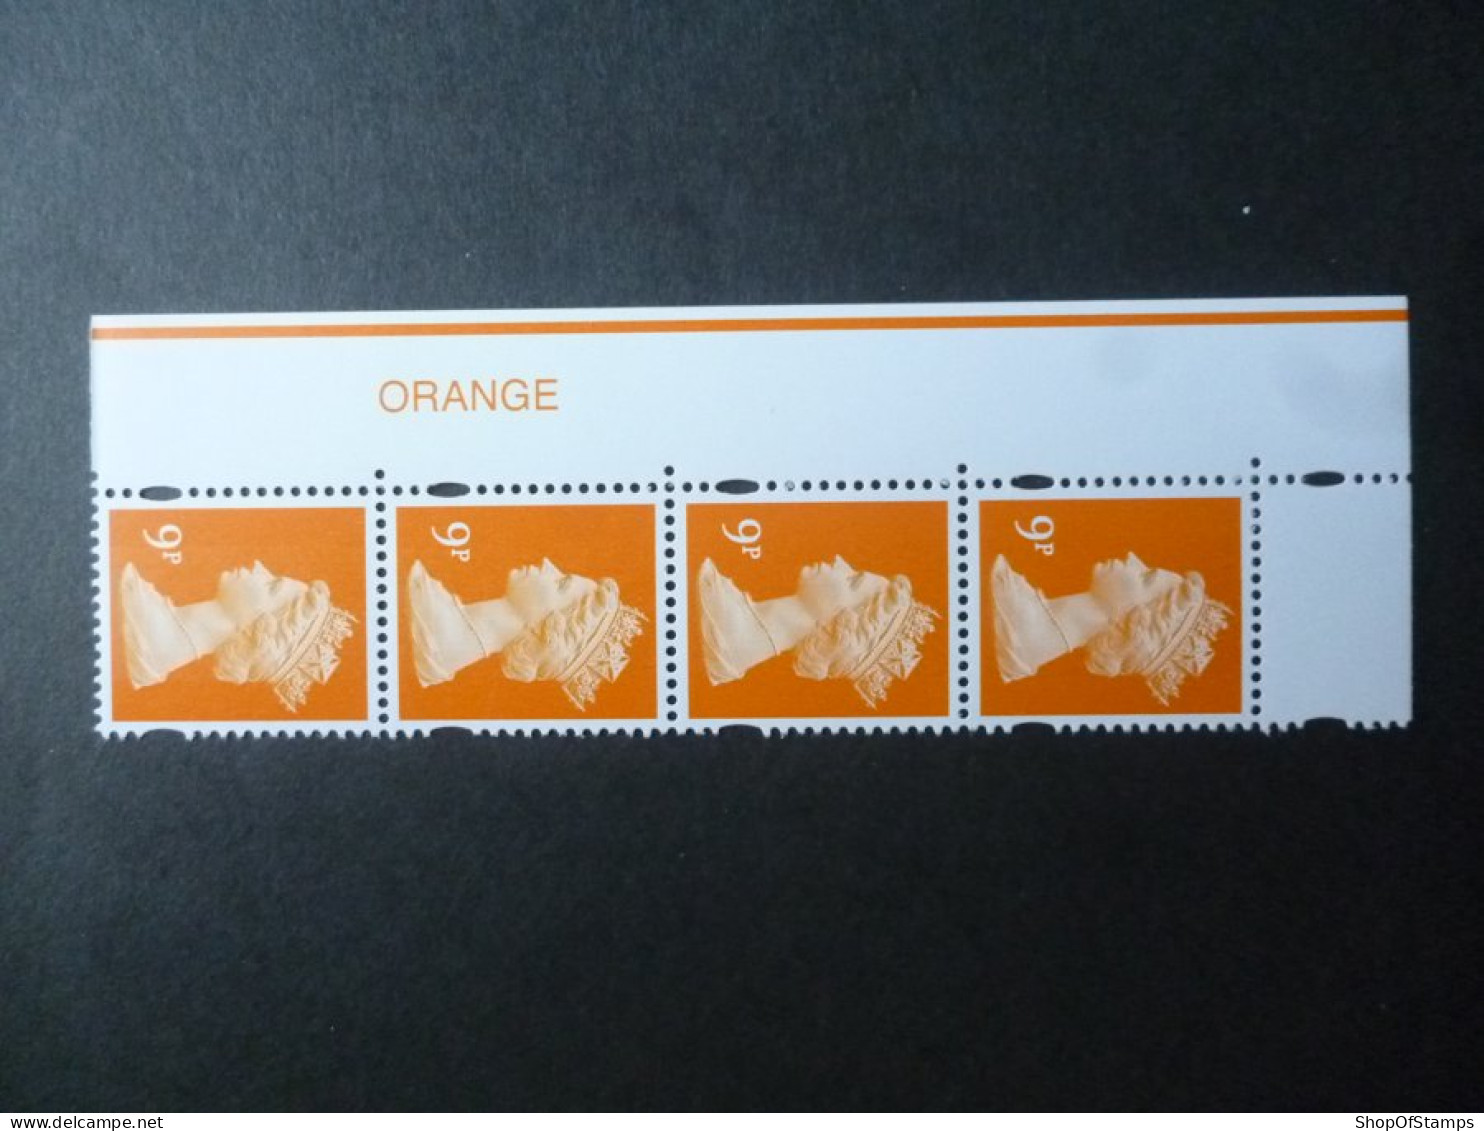 GREAT BRITAIN 9p STRIP OF 4 WITH MARGIN IMPRINT ORANGE - Stamped Stationery, Airletters & Aerogrammes